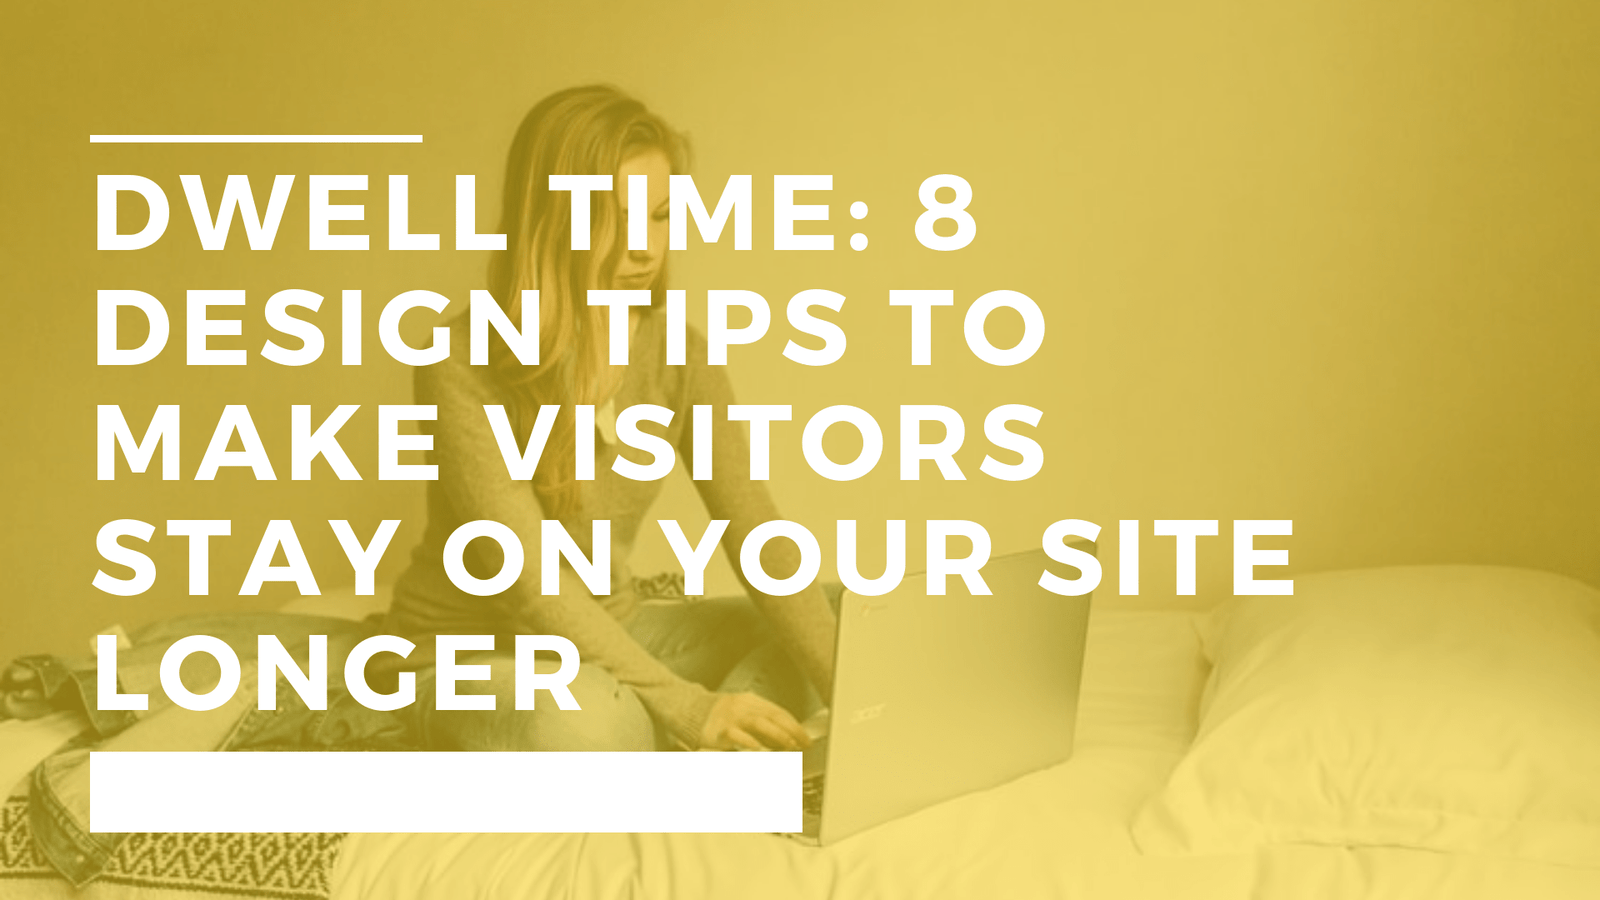 8 Design Tips to Make Visitors Stay on Your Site Longer